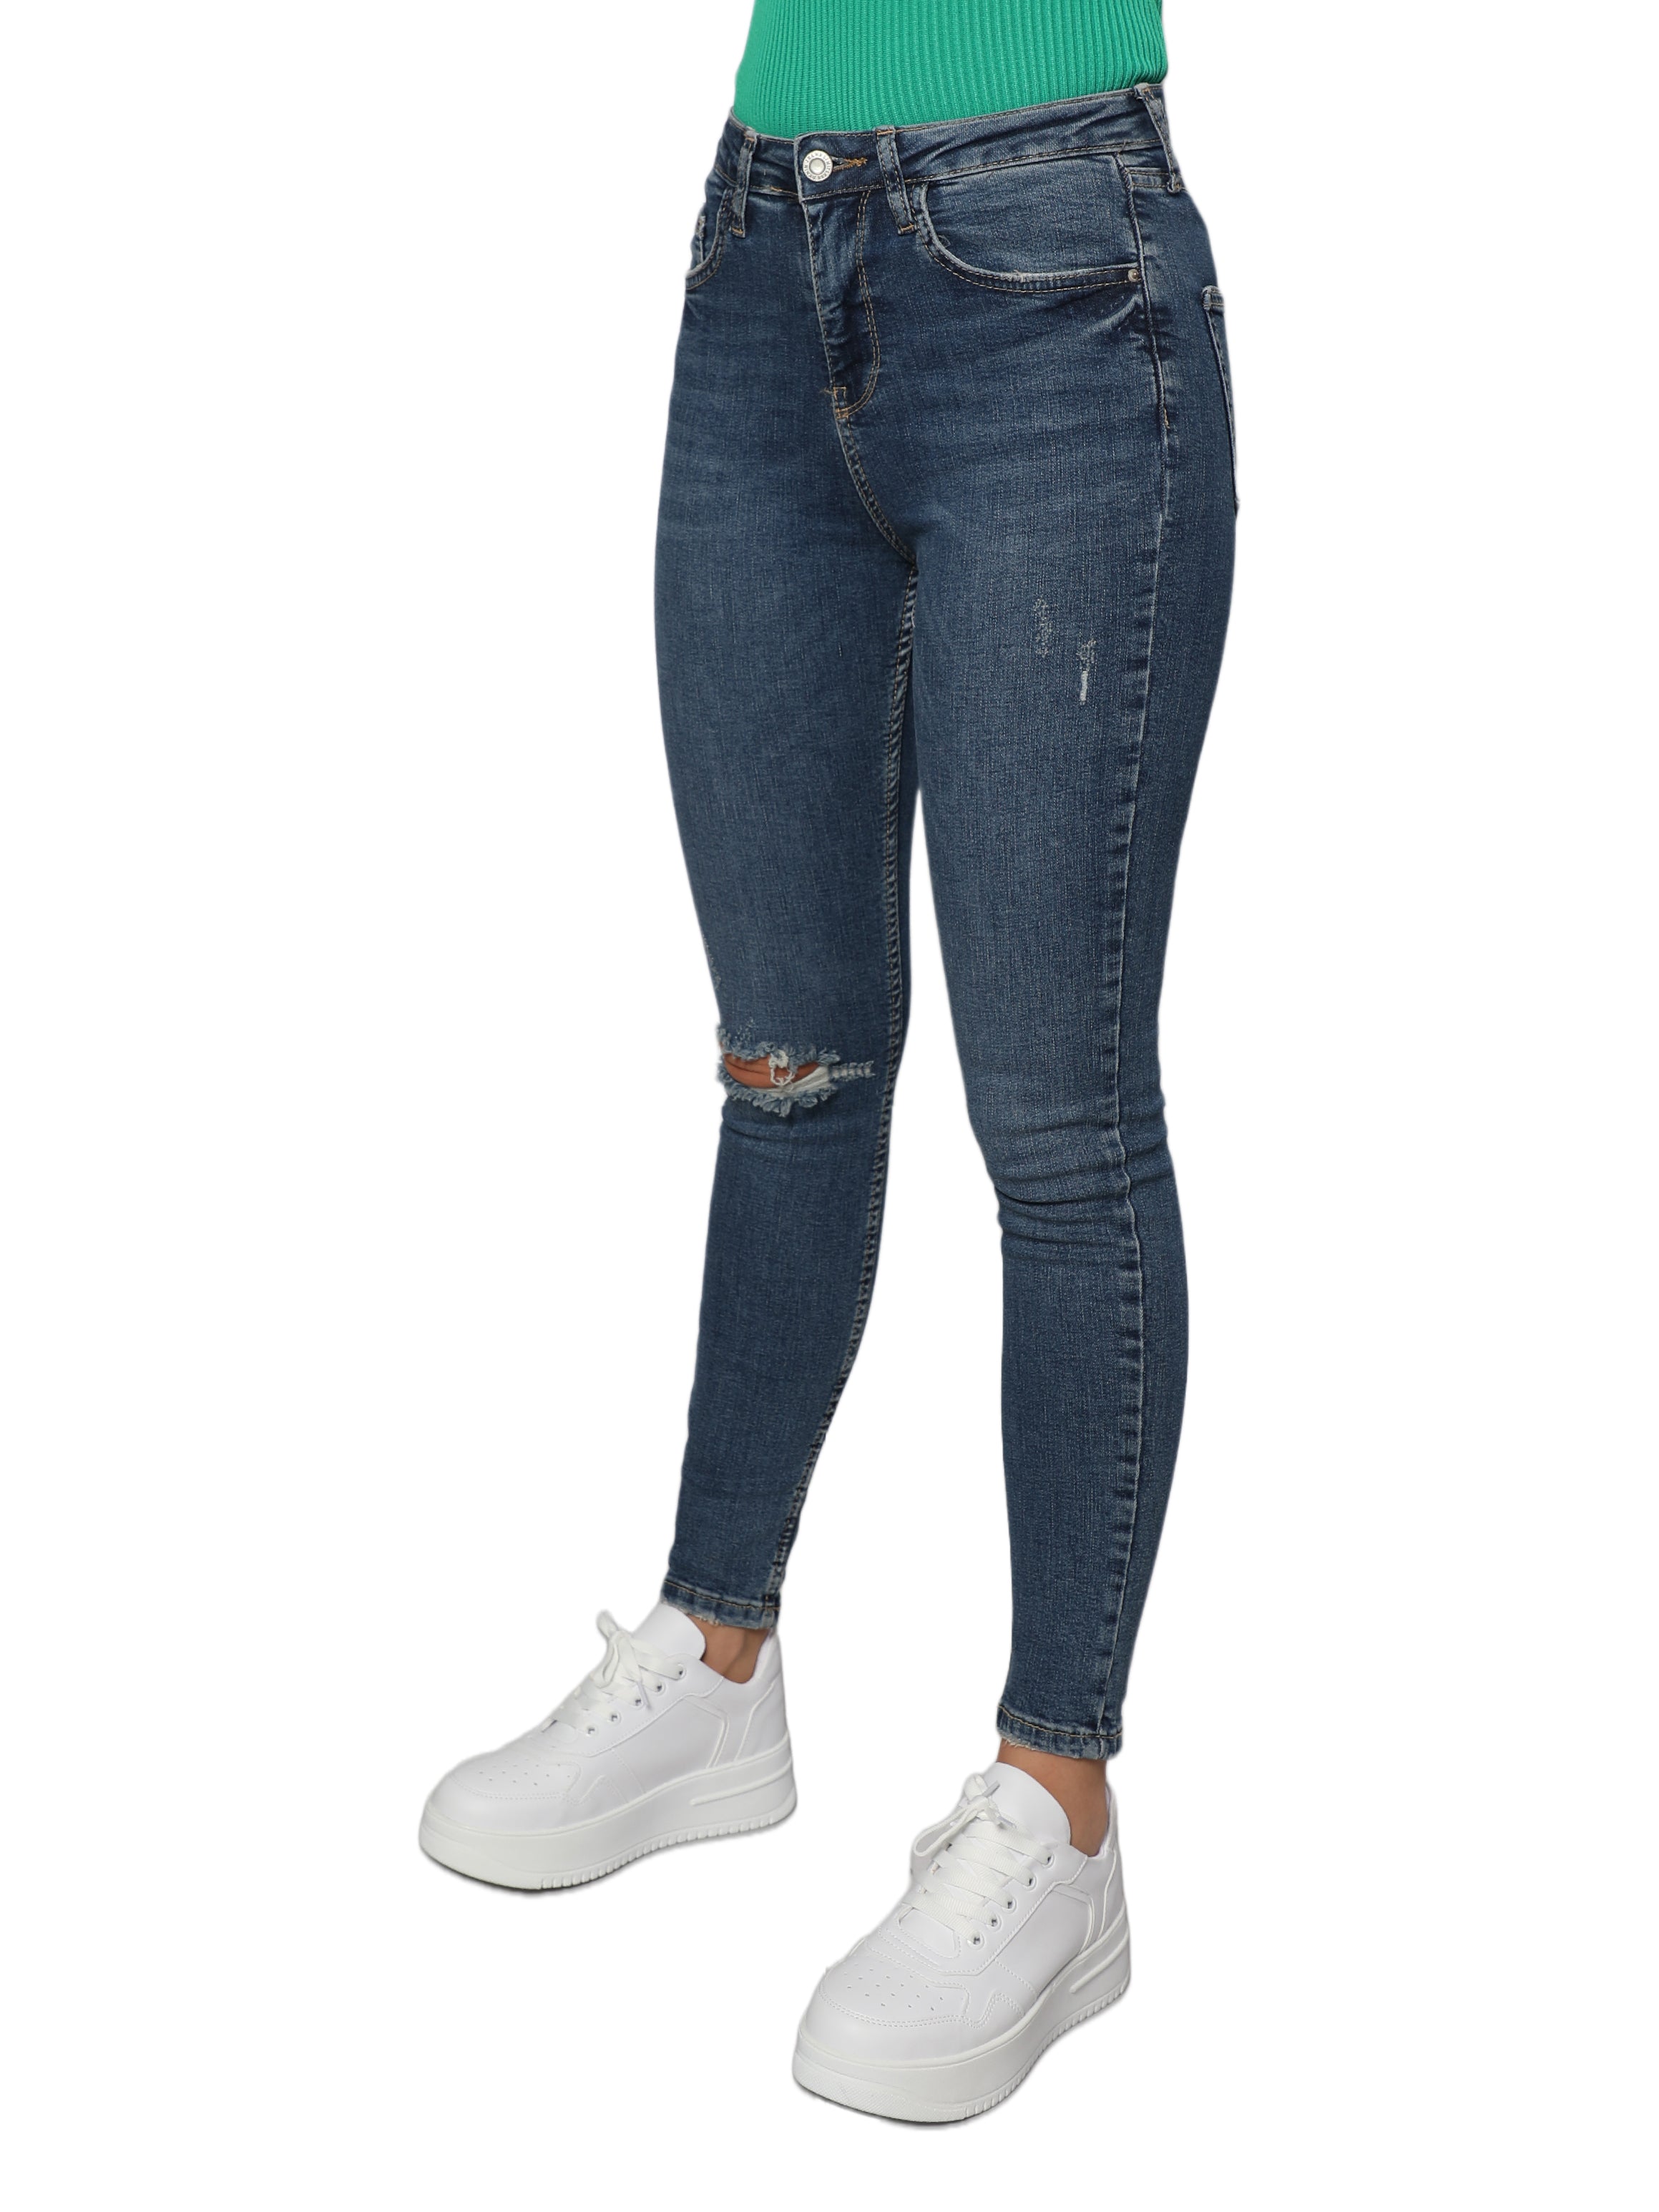 Women Blue Skinny Jeans With Ripped Design